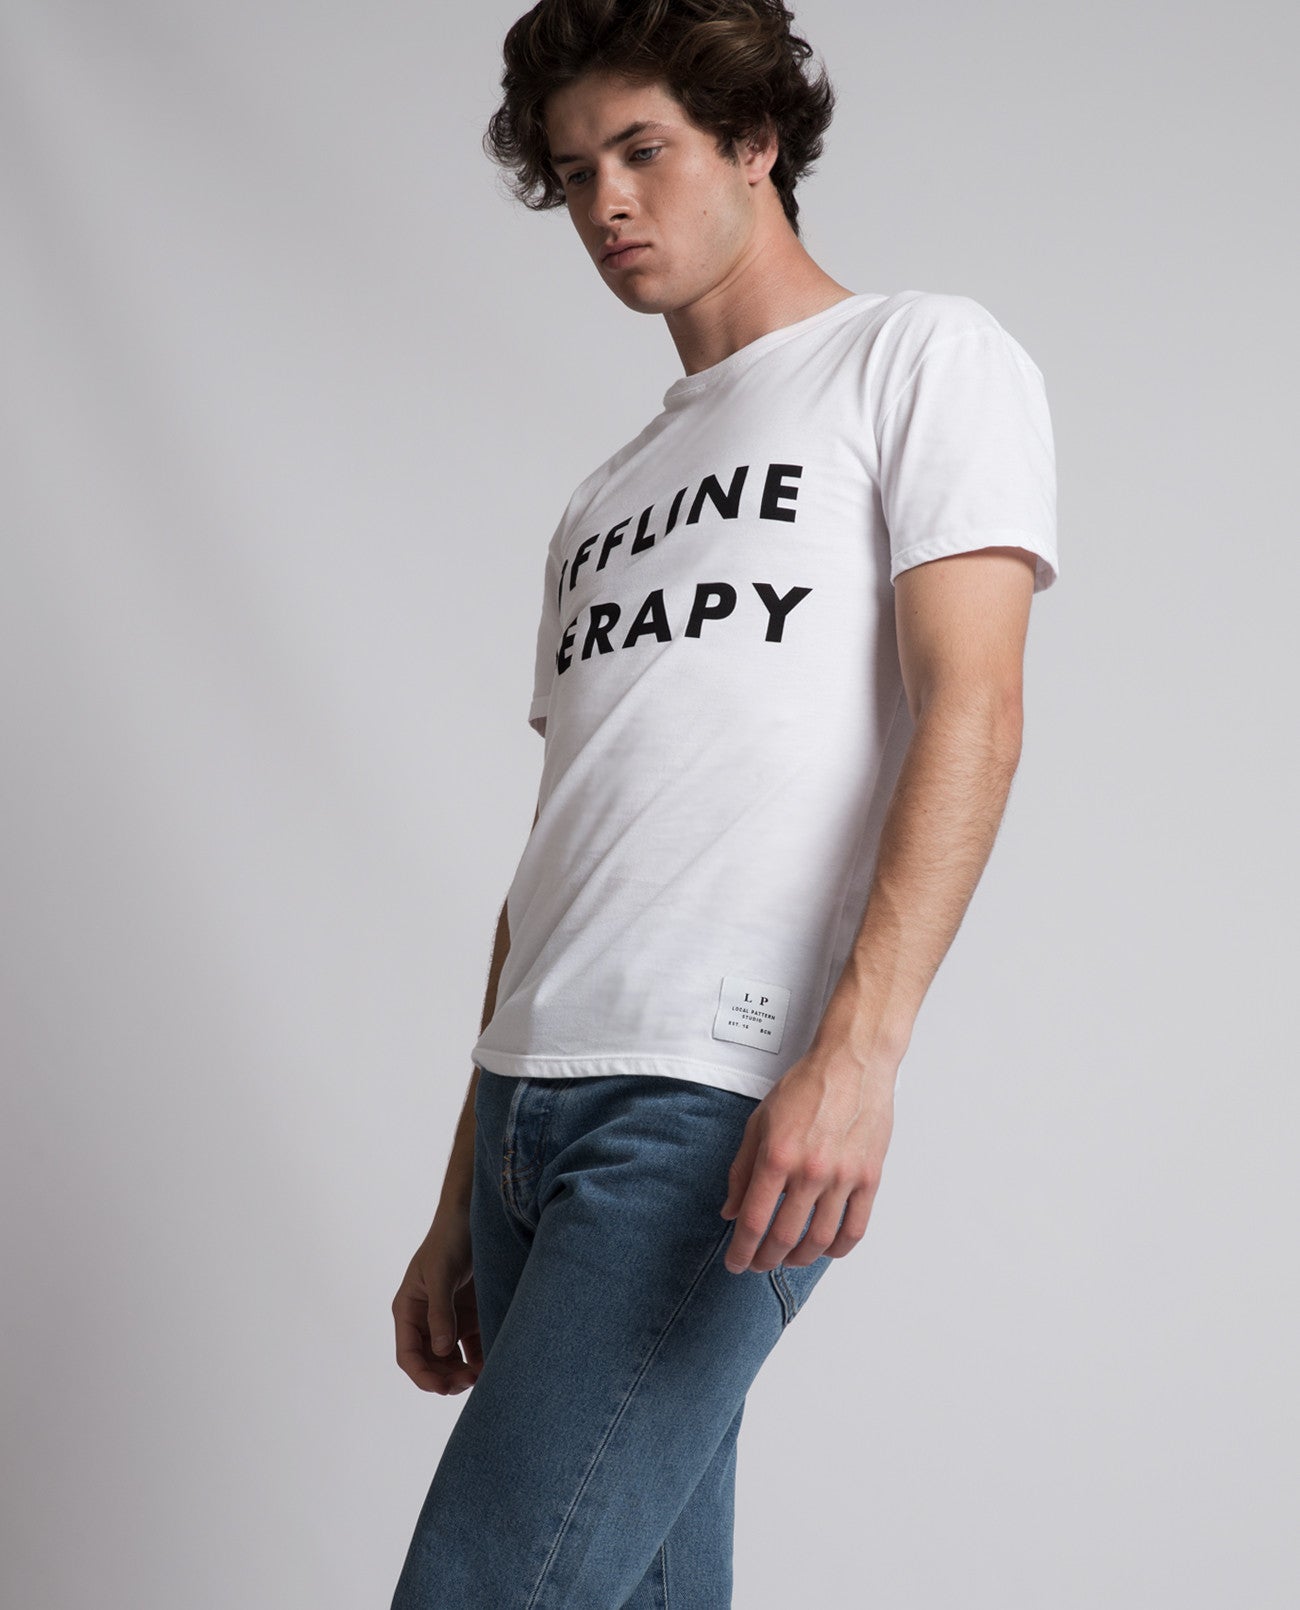 Offline Therapy Tee - Local Pattern